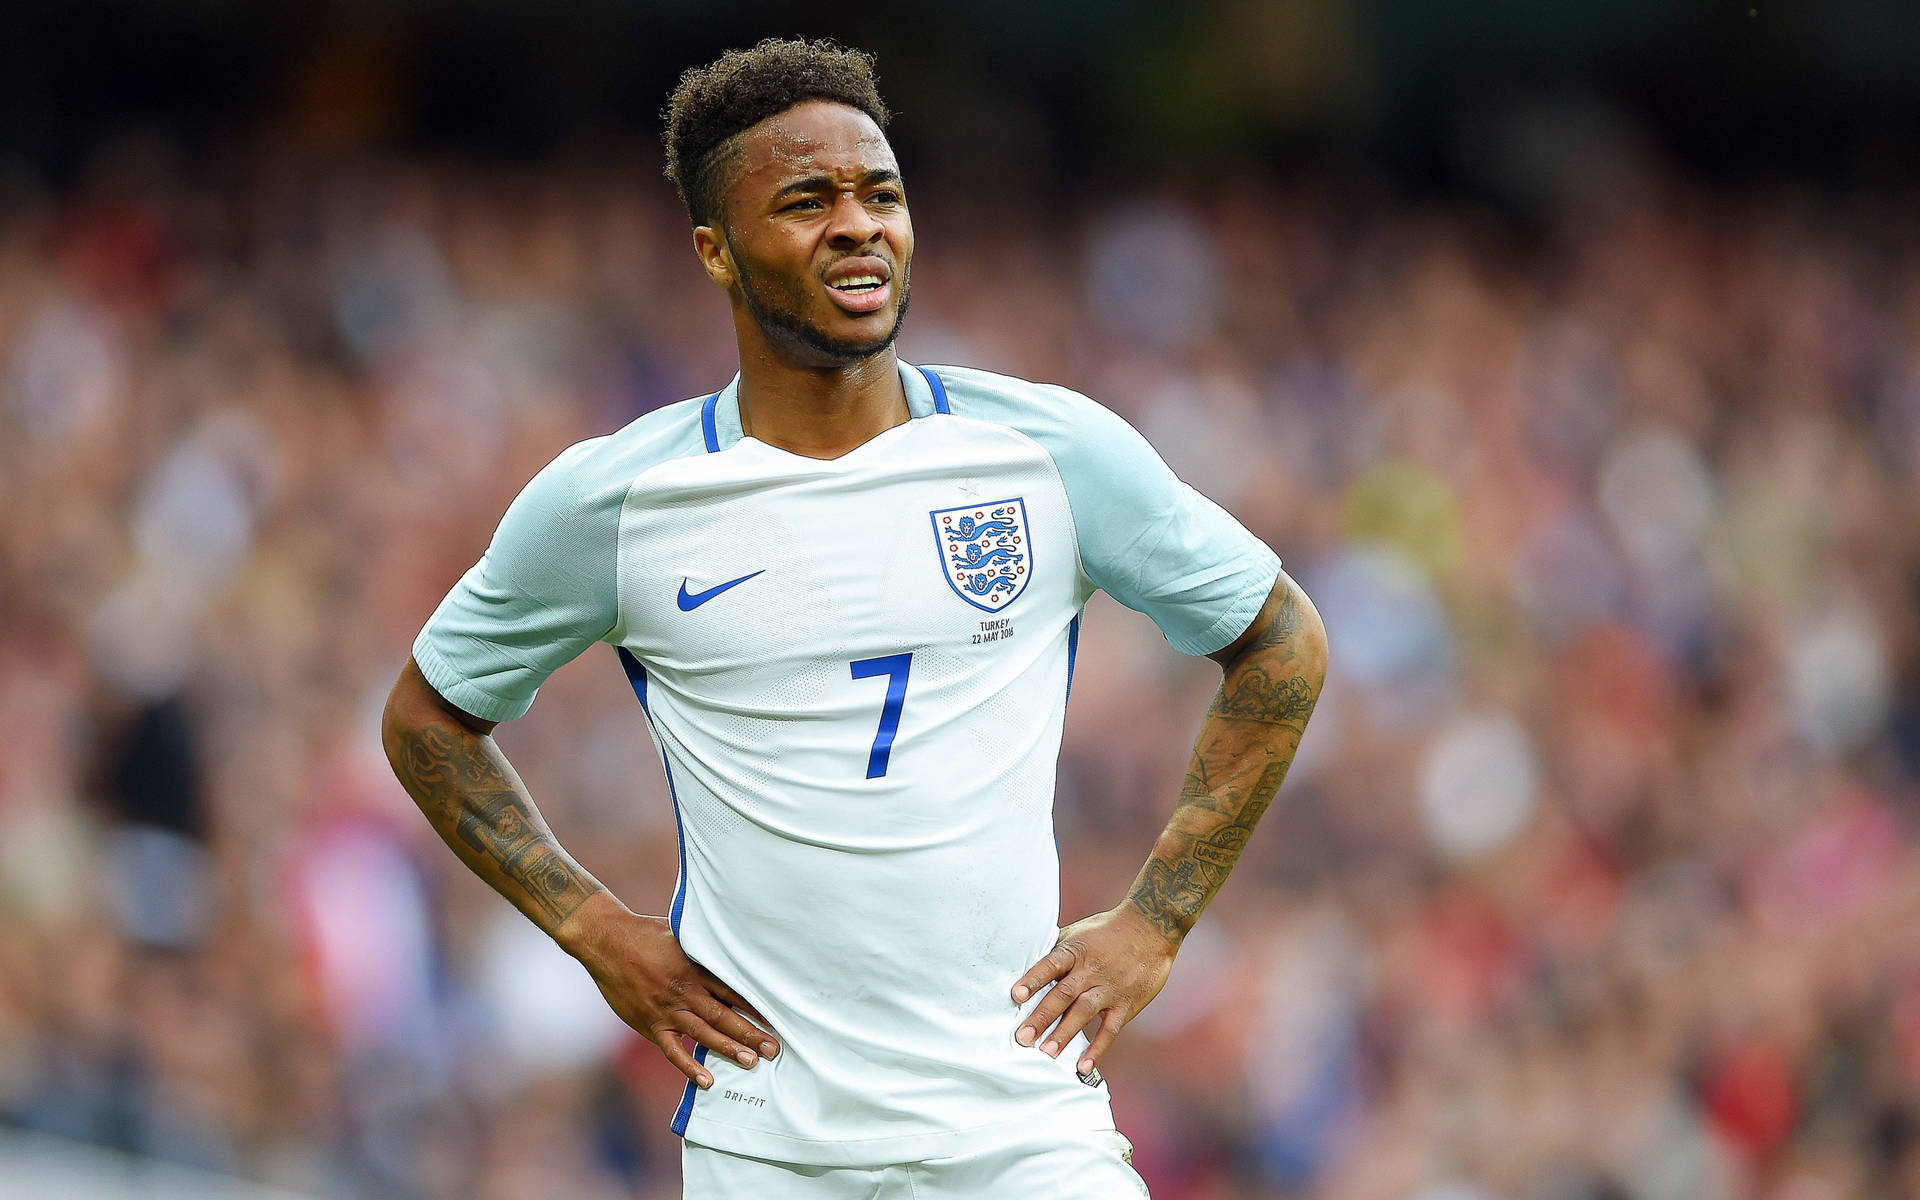 Raheem Sterling In White Dri-fit Picture